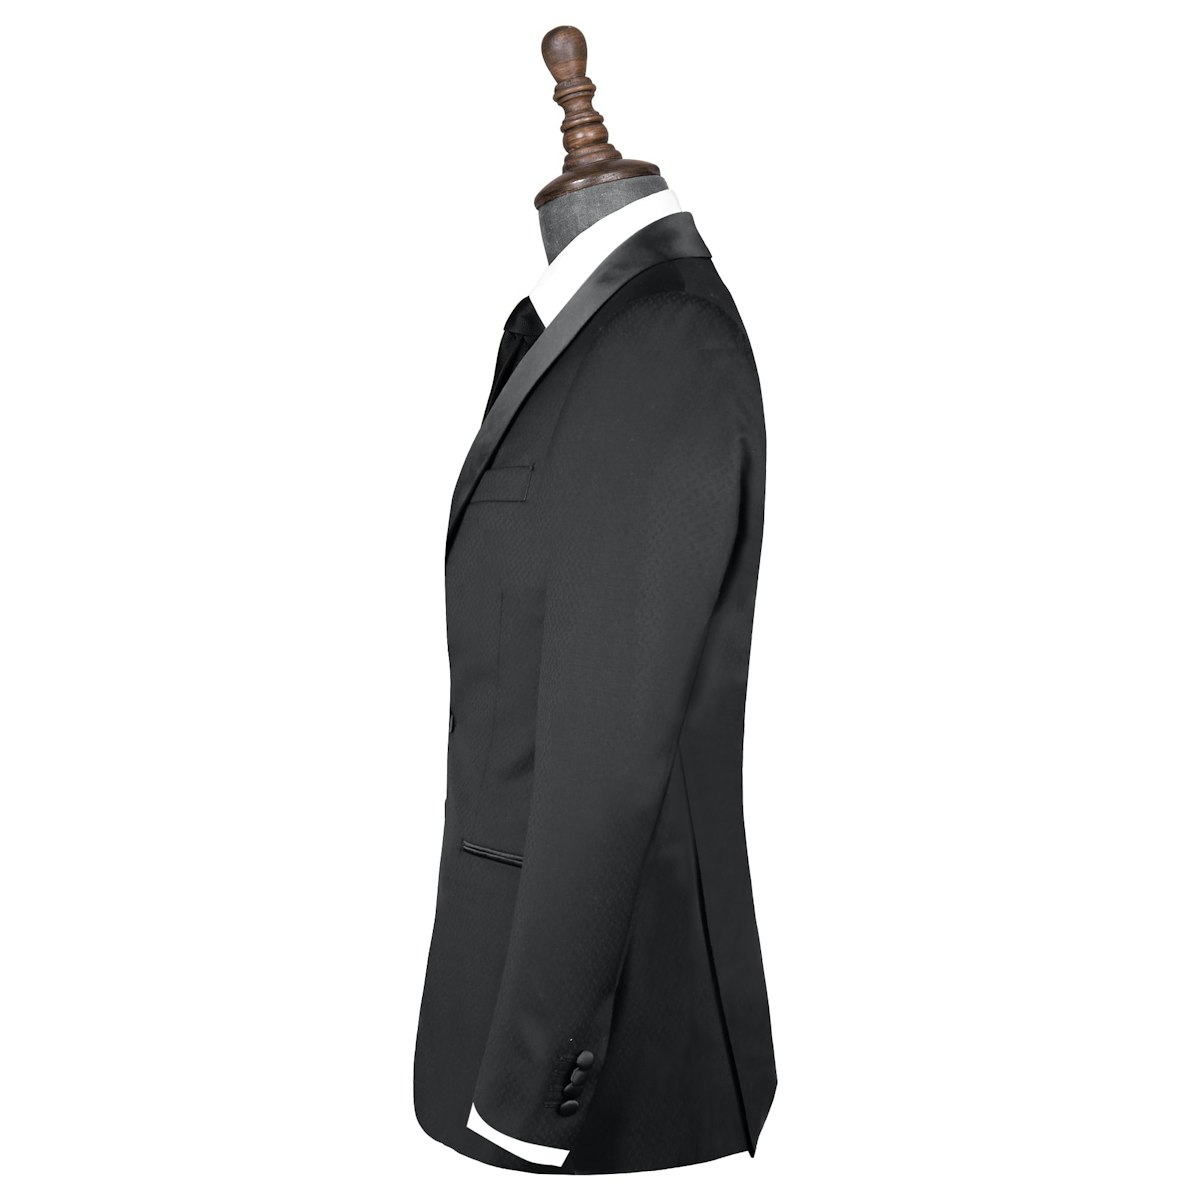 InStitchu Collection The Windslow mens suit